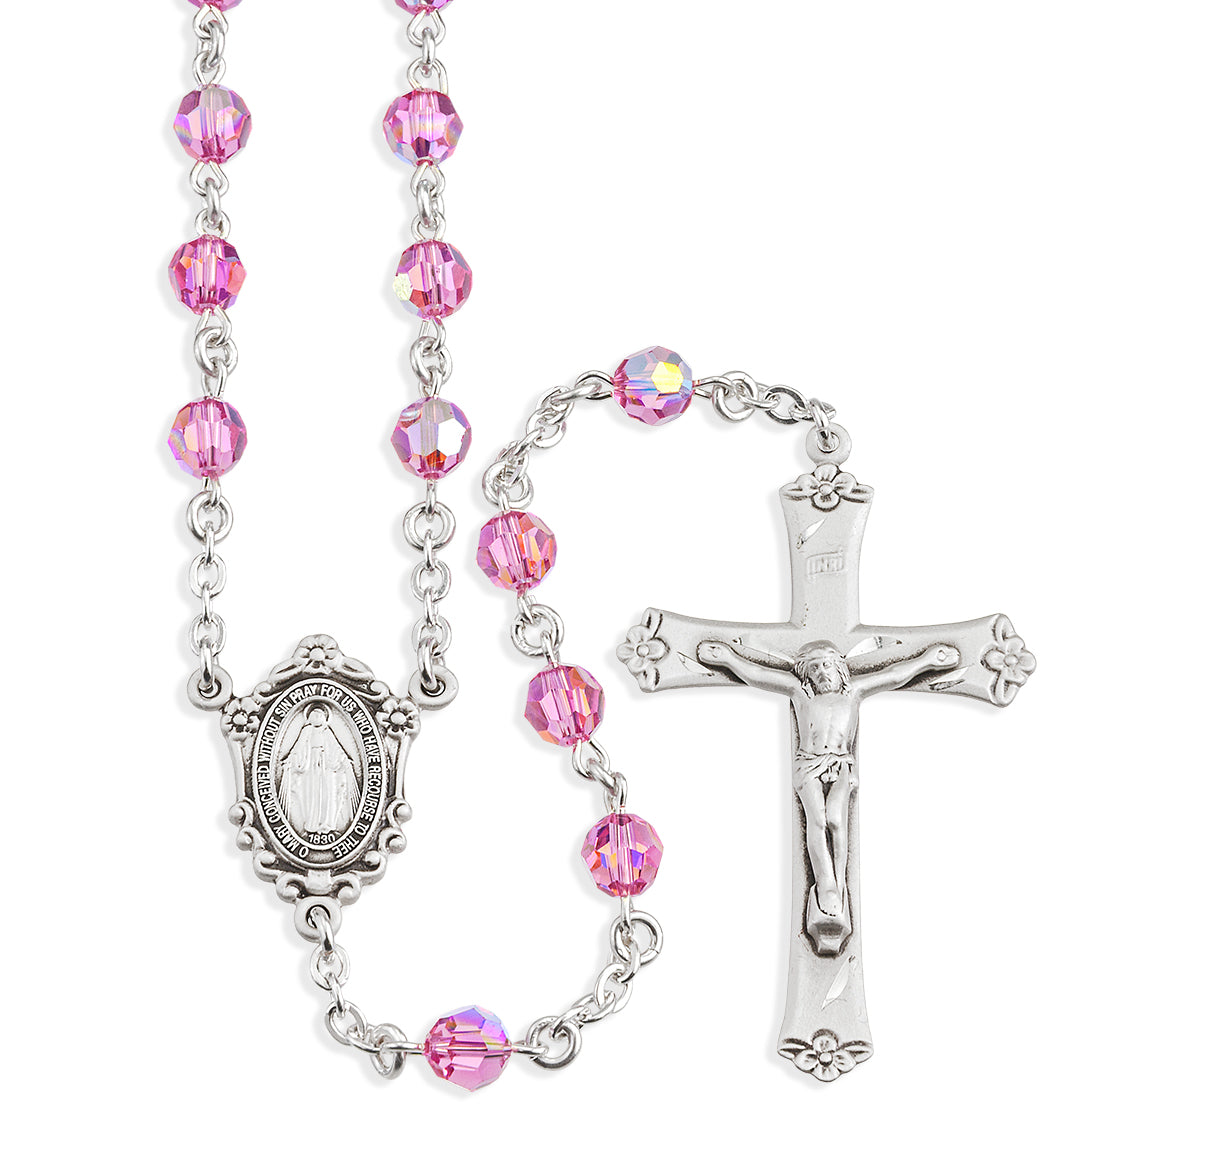 Sterling Silver Rosary Hand Made with Swarovski Crystal 6mm Pink Faceted Round Beads by HMH